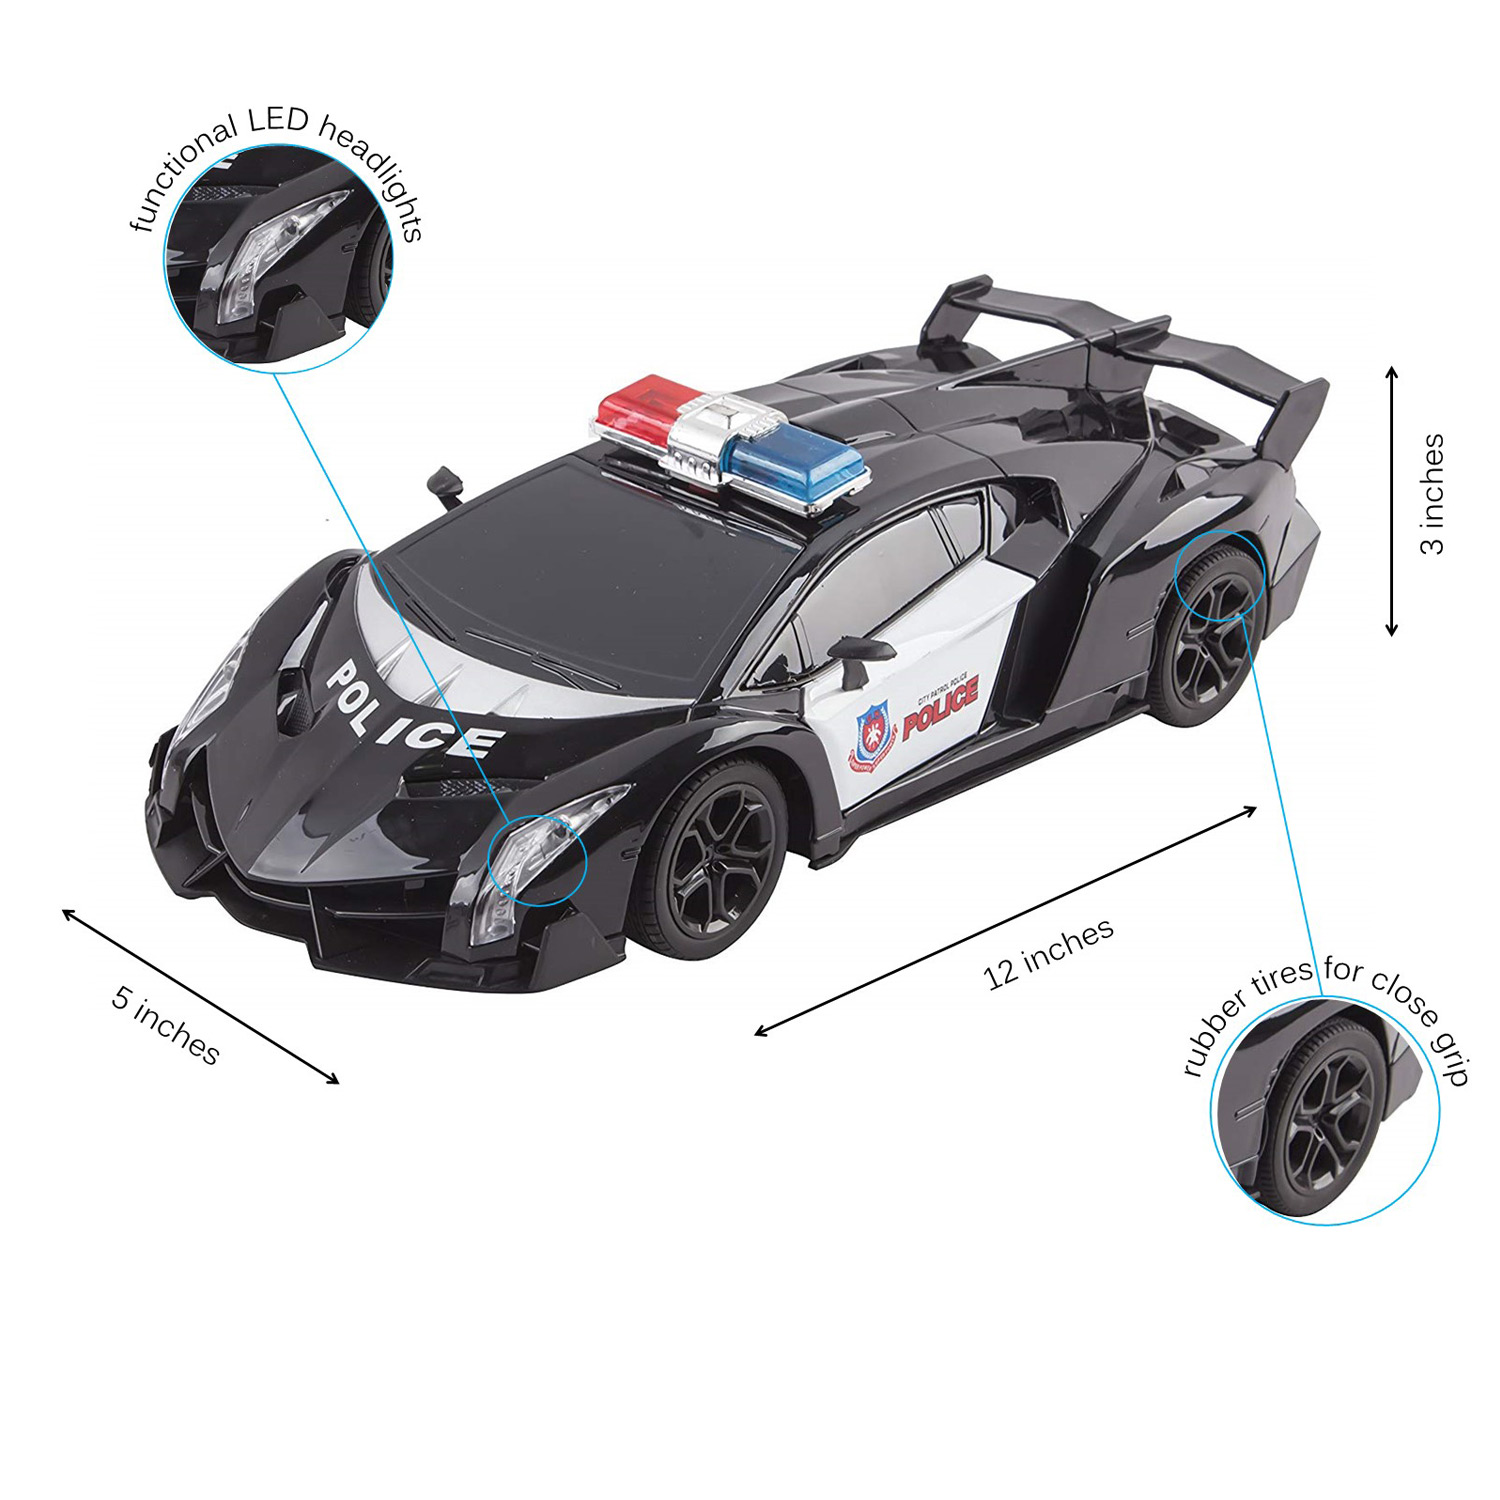 rc cars with remote control